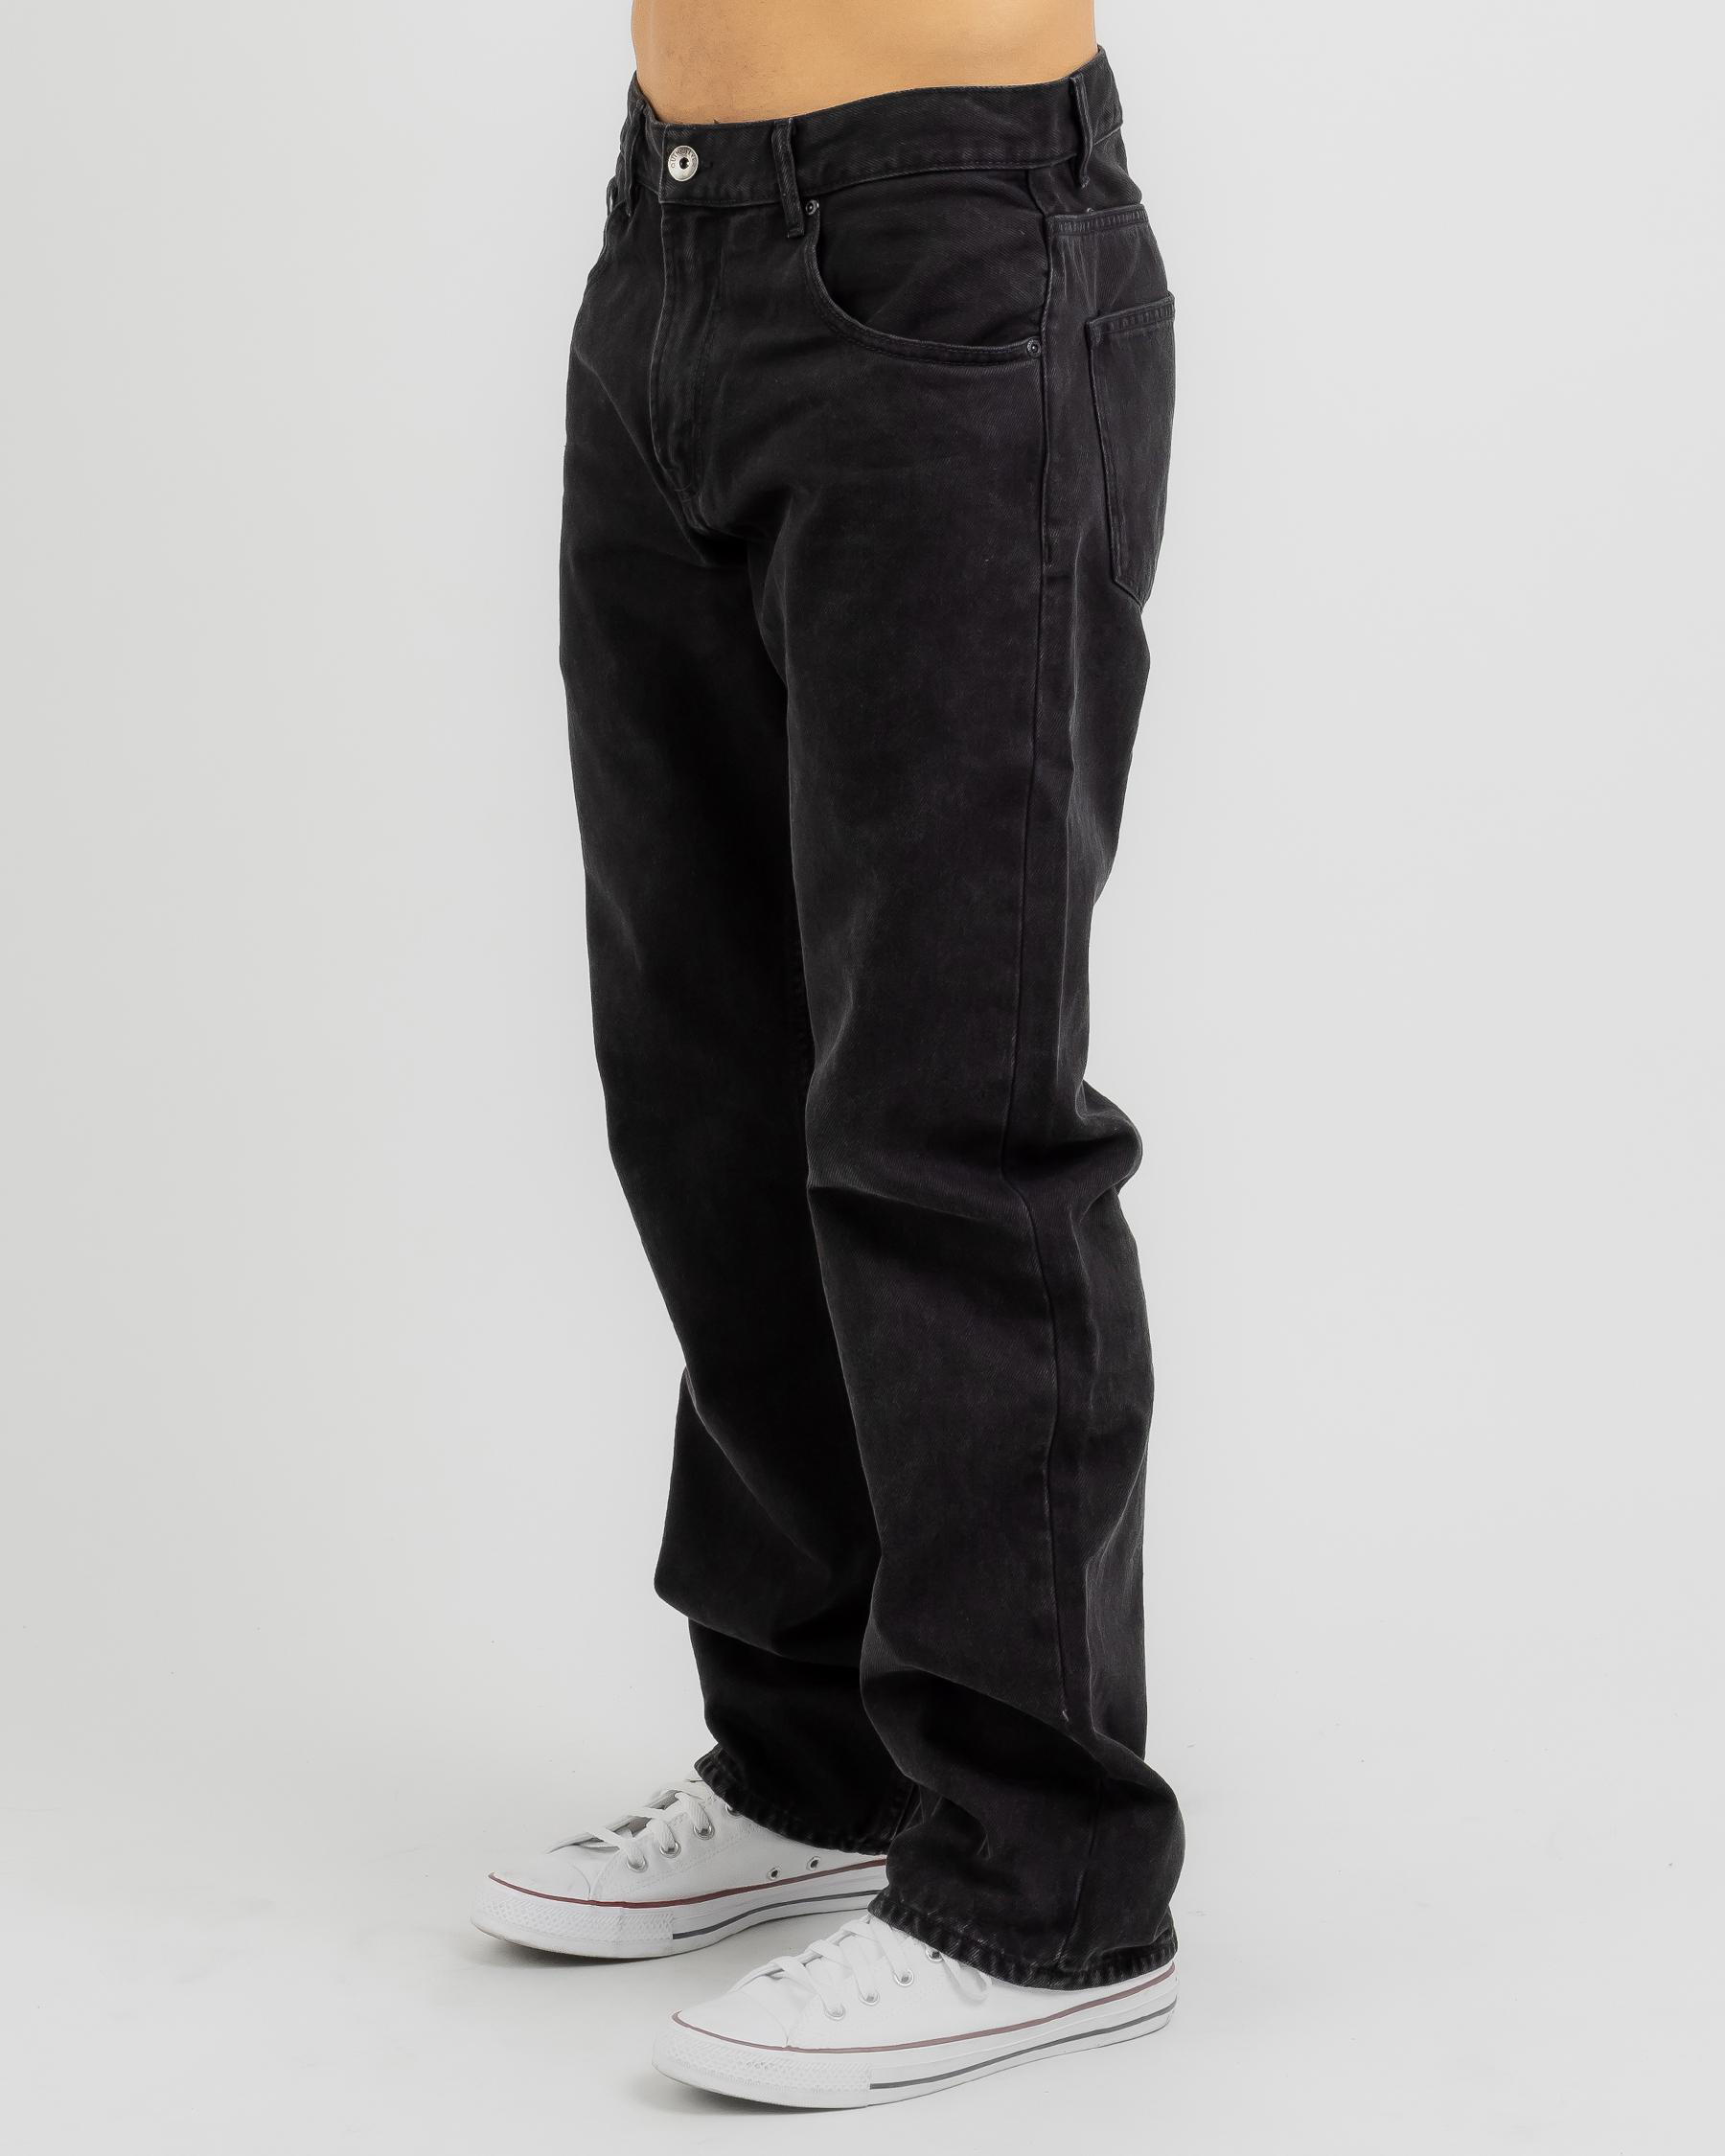 Quiksilver Baggy Washed Black Jeans In Black/black - Fast Shipping ...